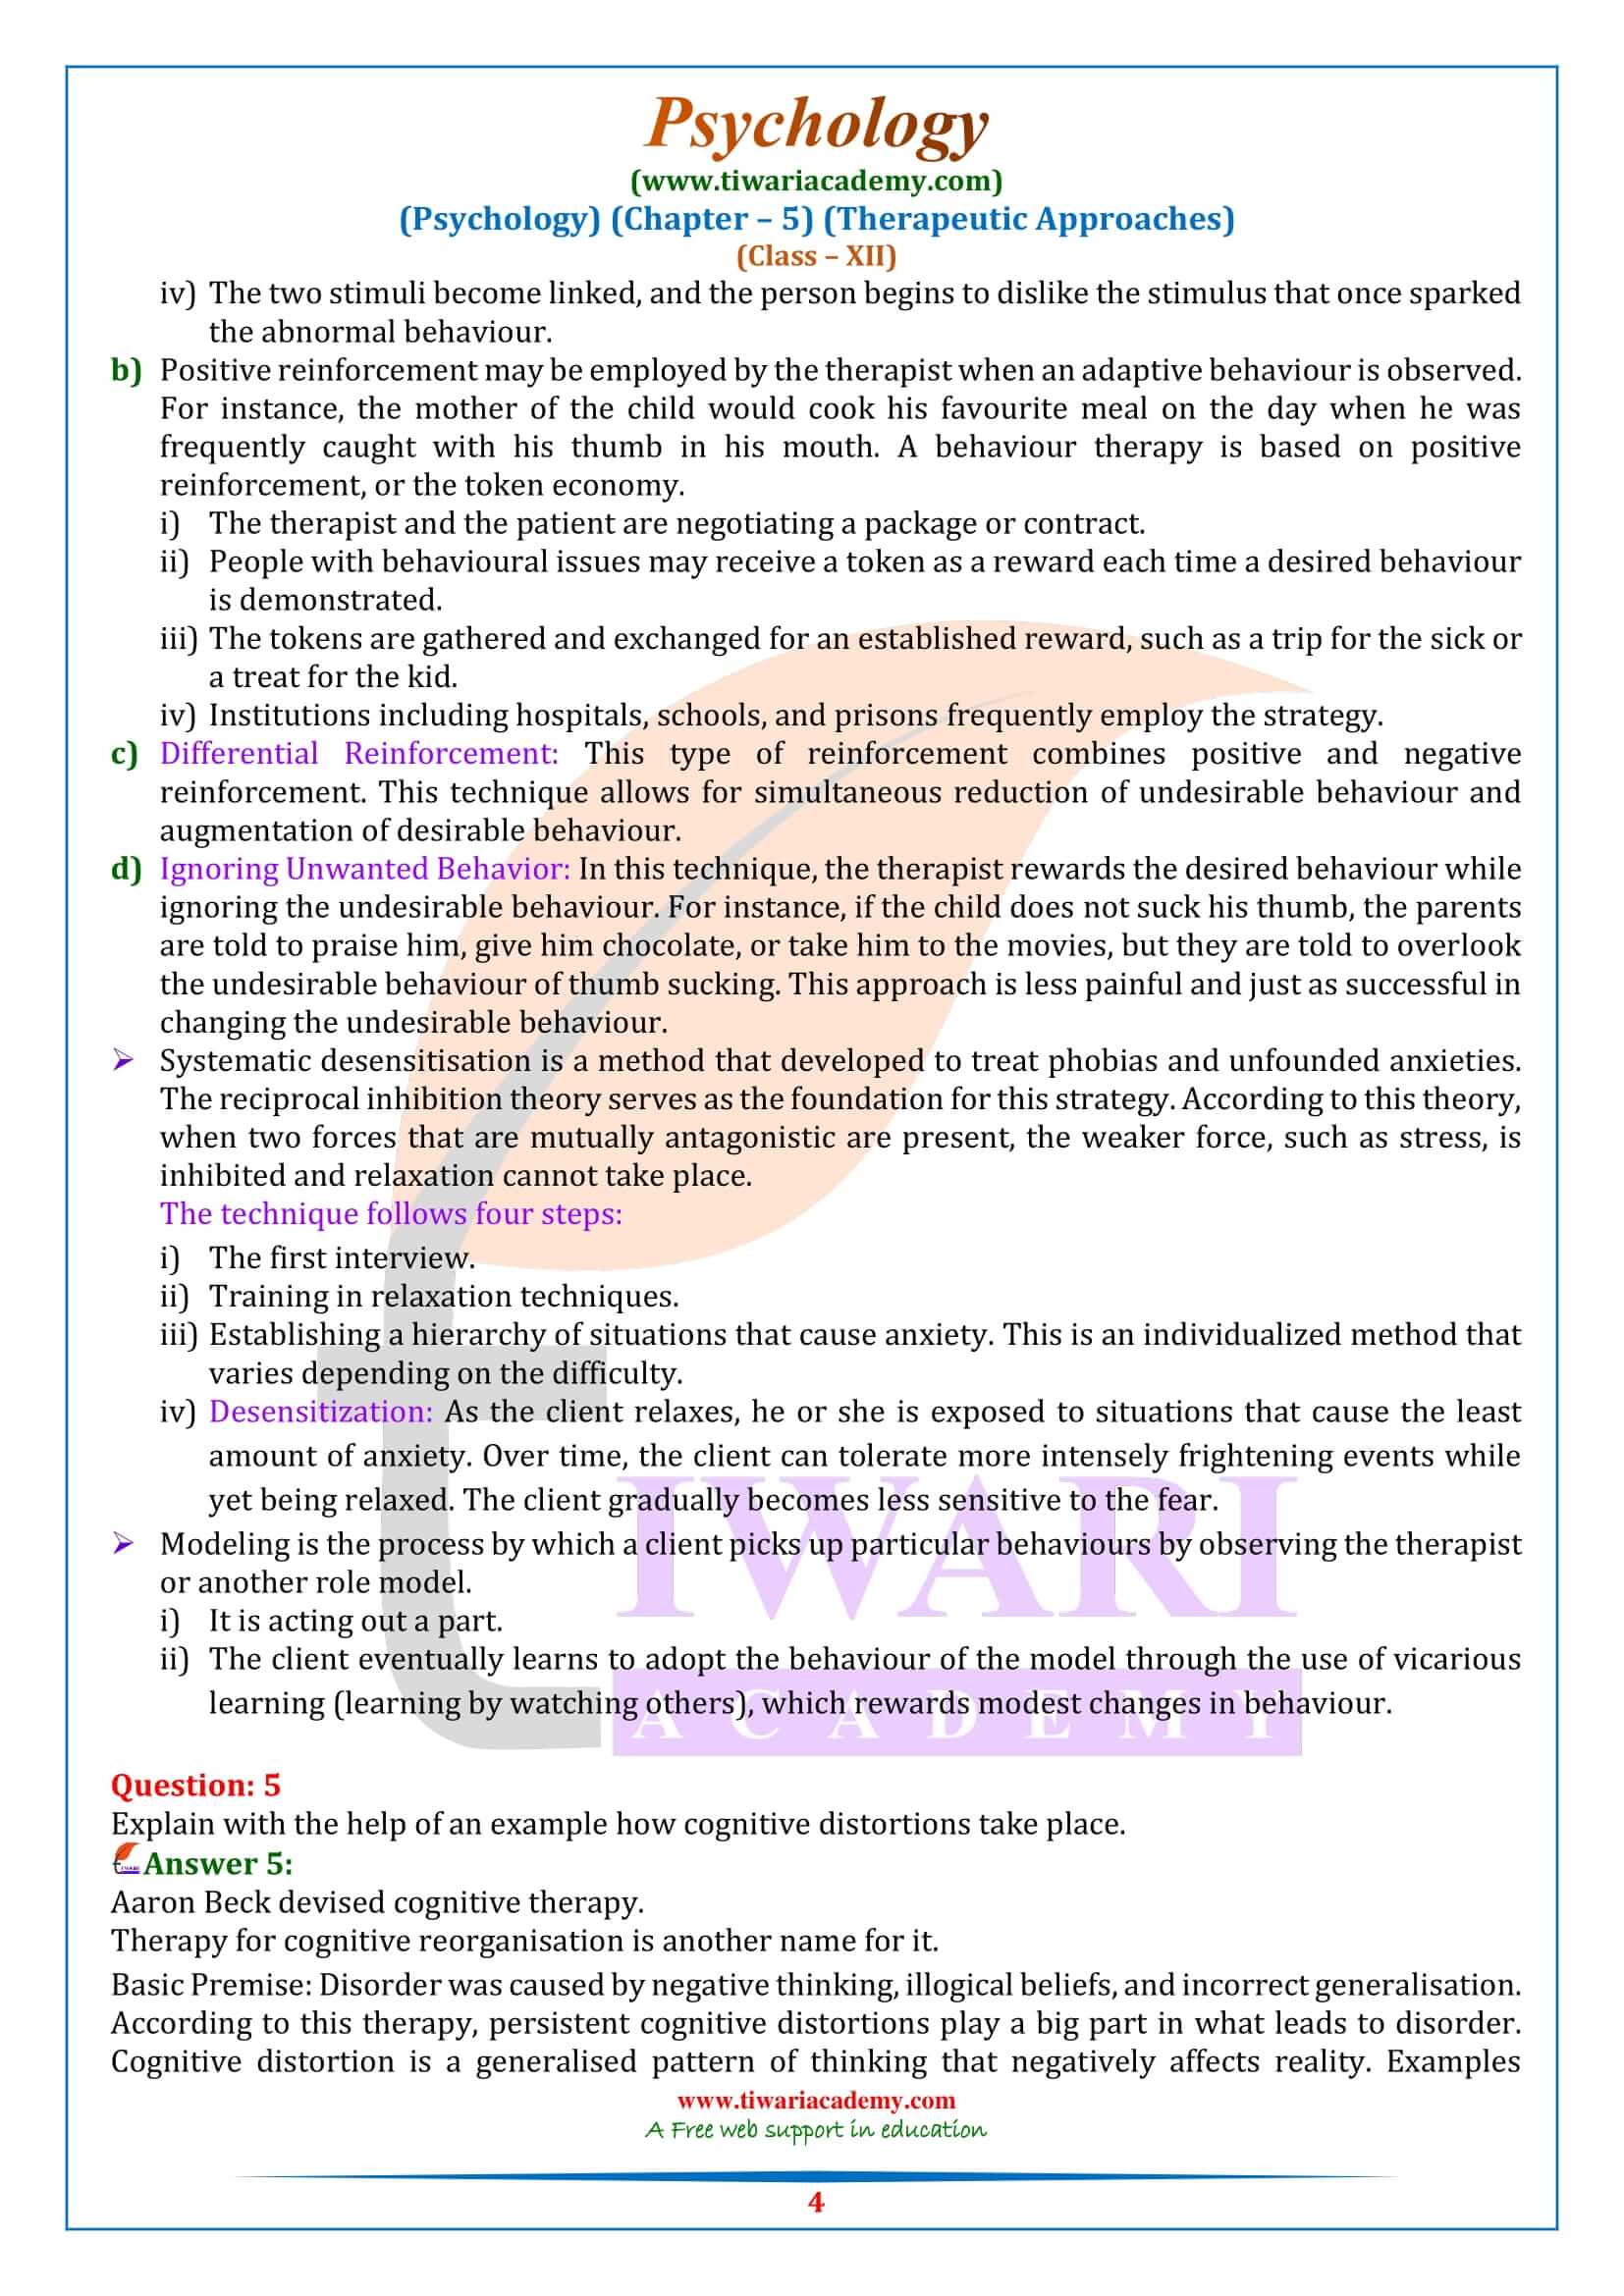 NCERT Solutions for Class 12 Psychology Chapter 5 free download